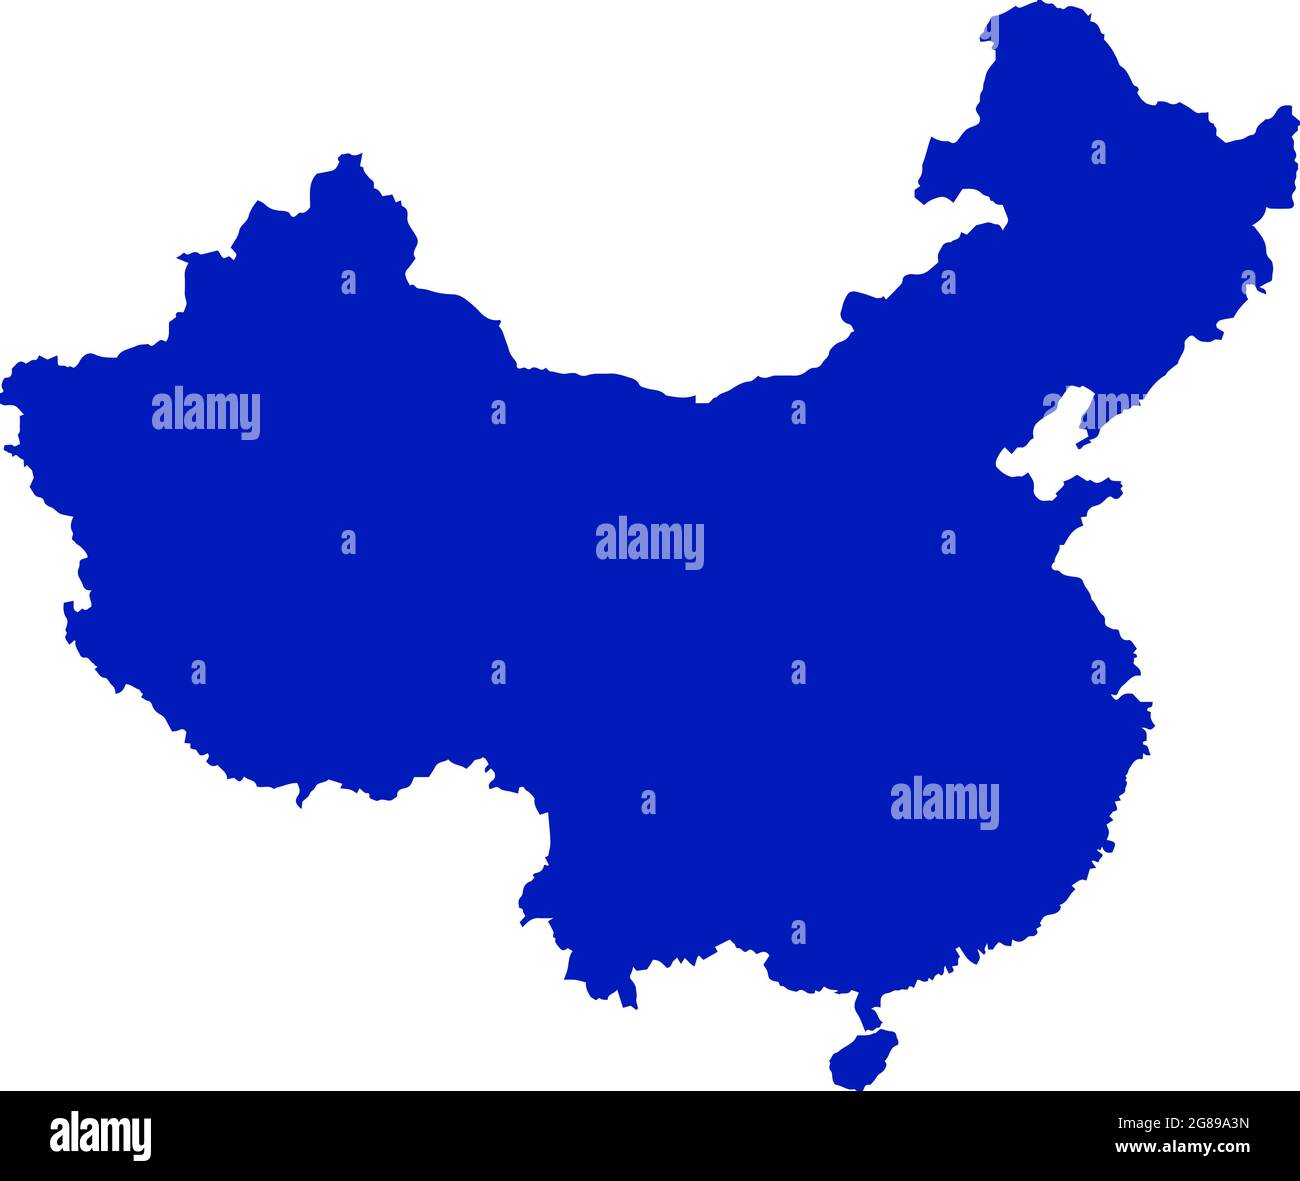 Blue colored People's Republic of China outline map. Political chinese map. Vector illustration map. Stock Vector